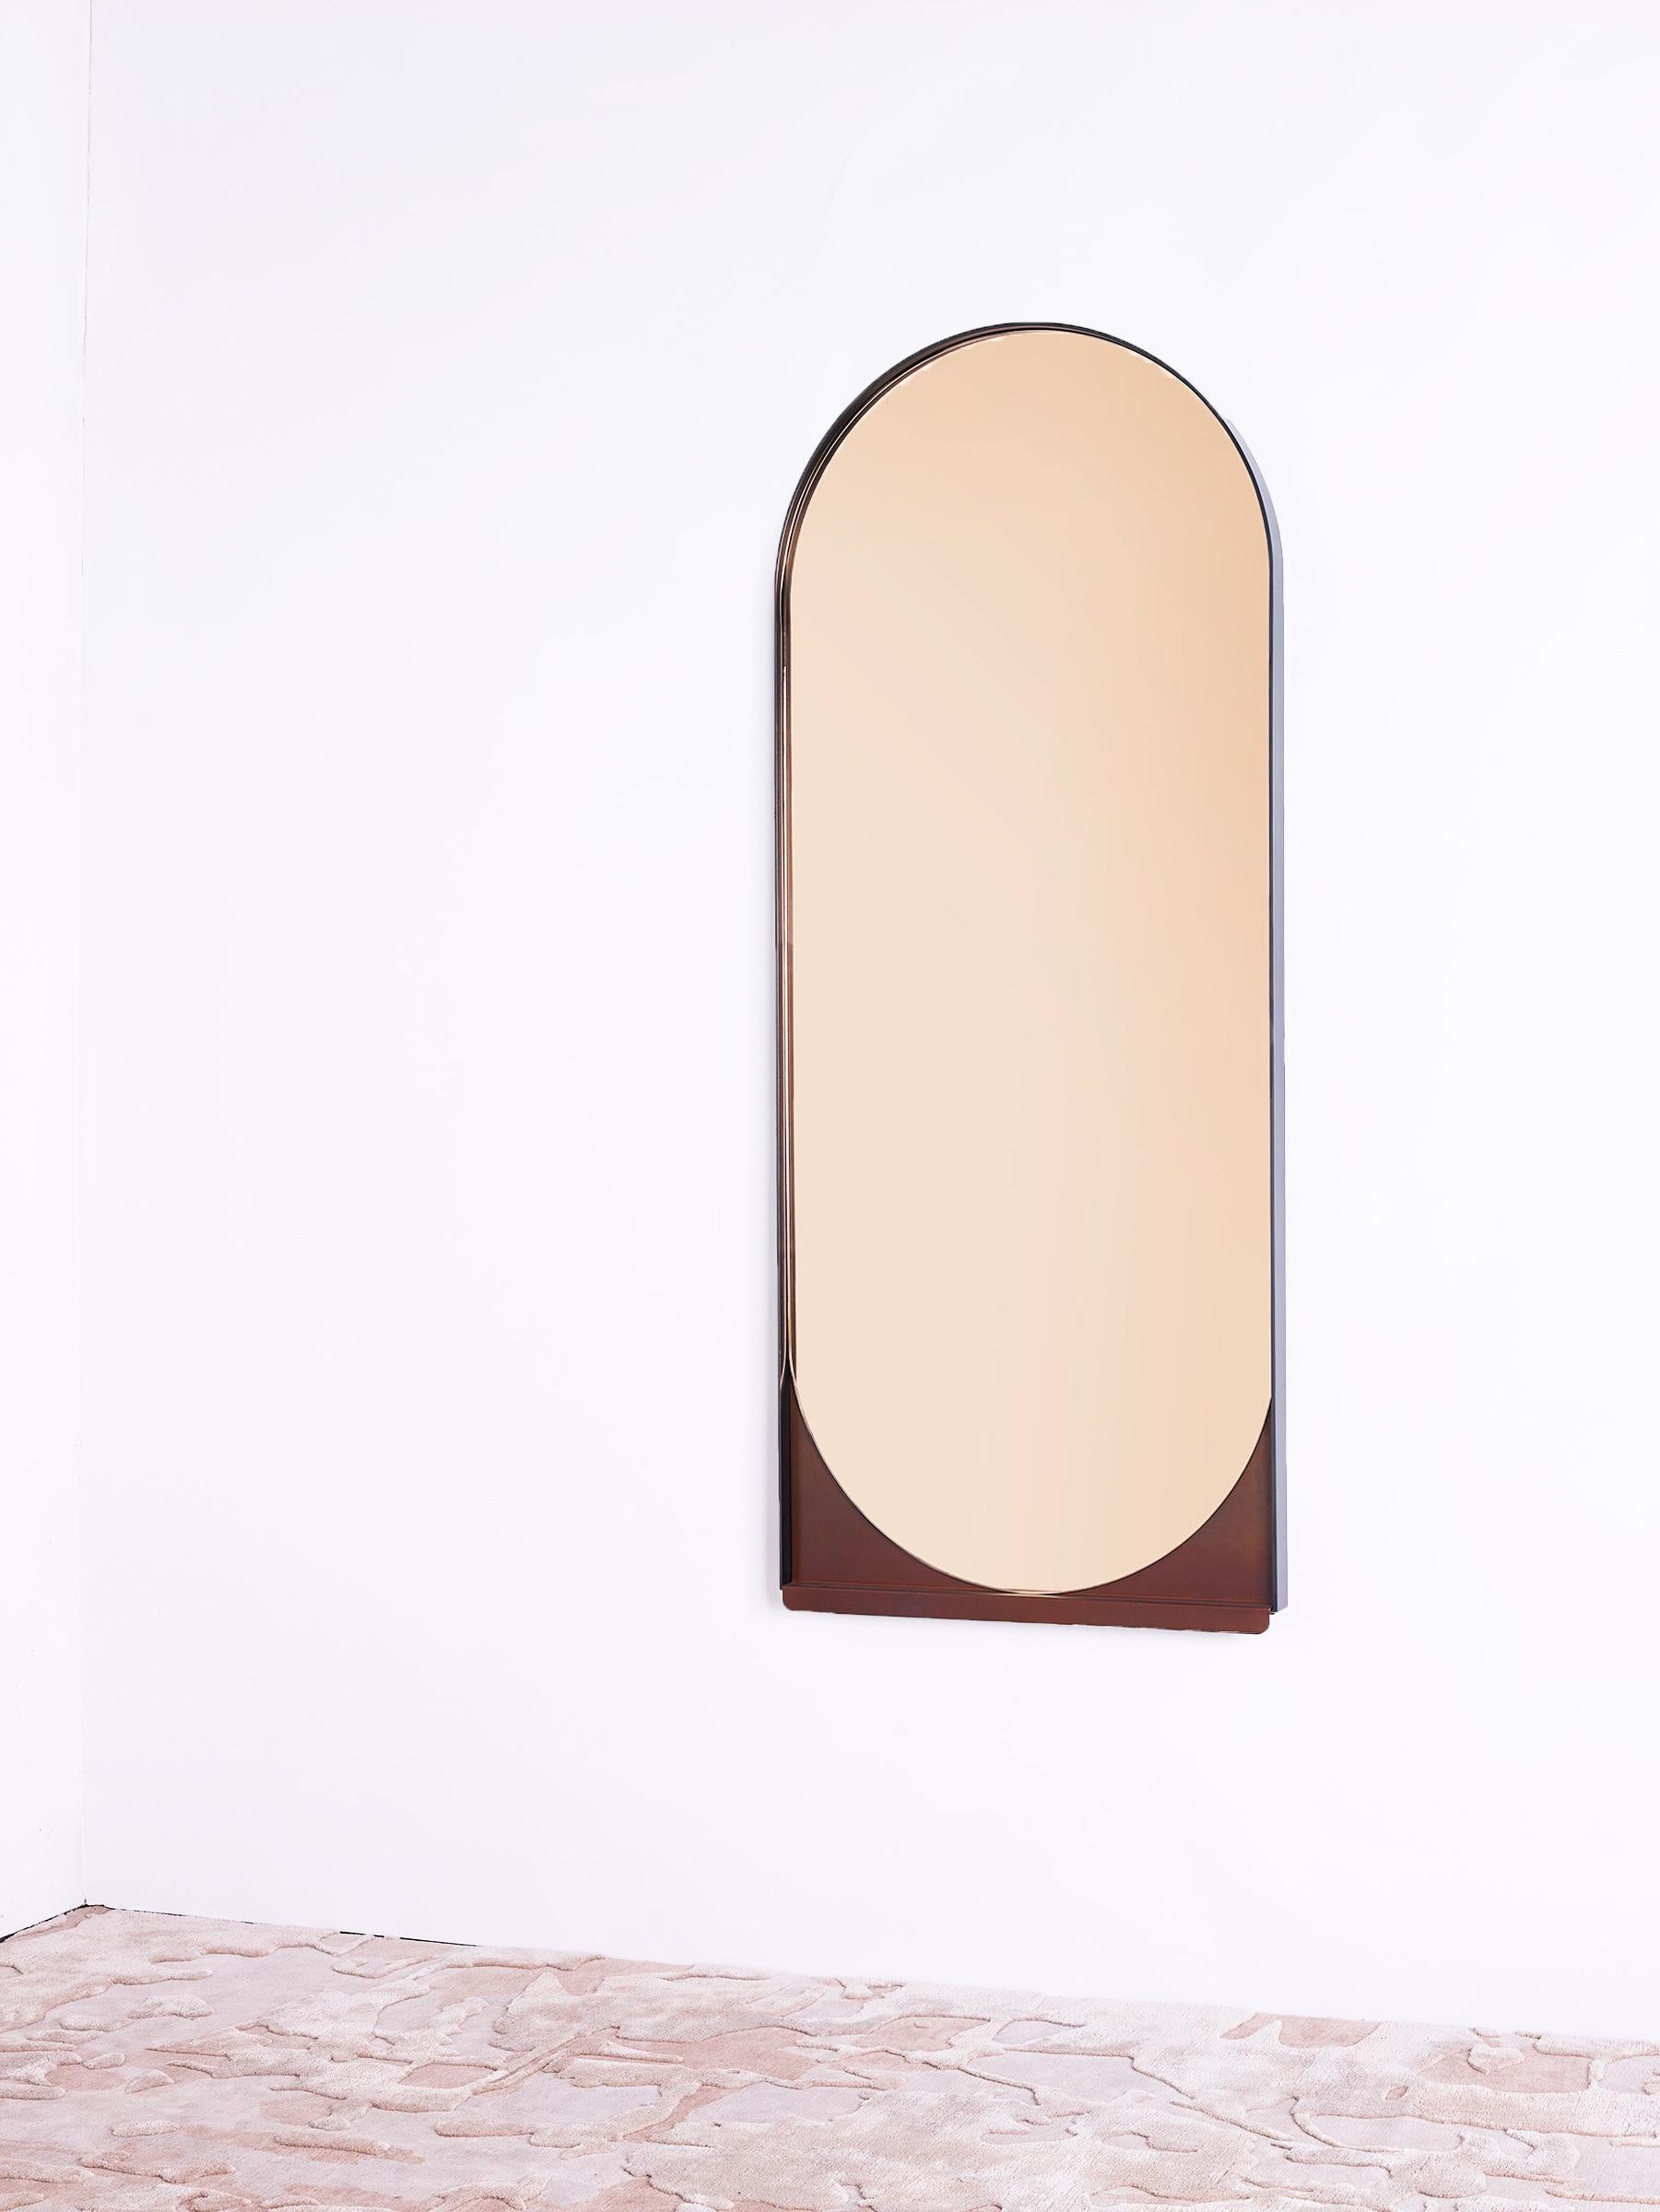 Simplicity is key to the slip mirror, whose thin blackened stainless steel frame delicately holds an oblong mirror. A contrasting red oxide shelf slips out from below, hinting at hidden layers beneath.
 